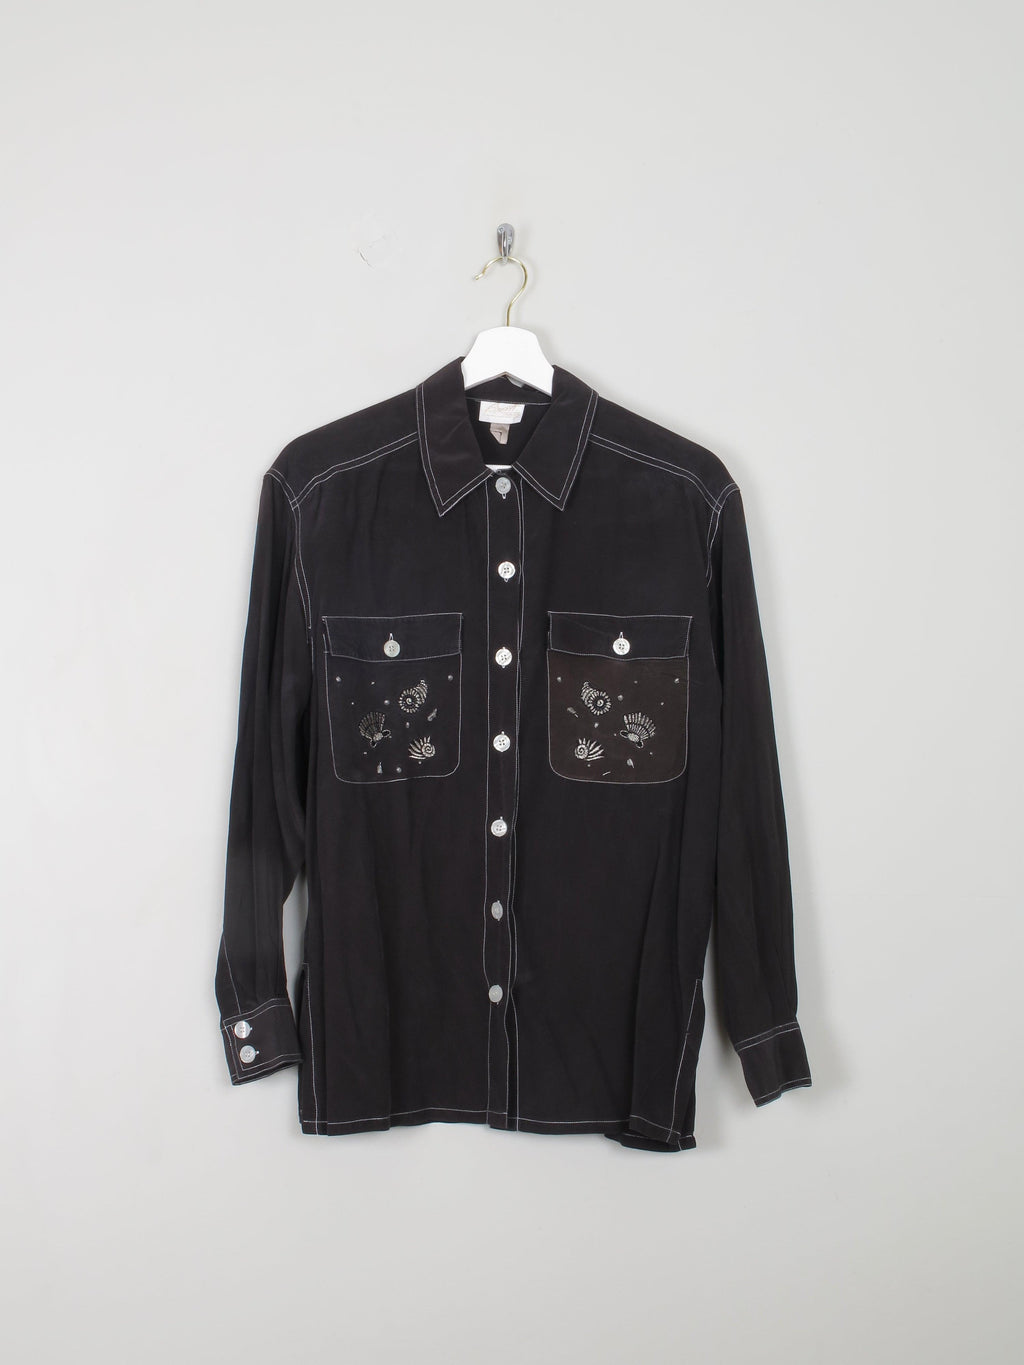 Women’s Black Silk Vintage Blouse With Motifs S - The Harlequin